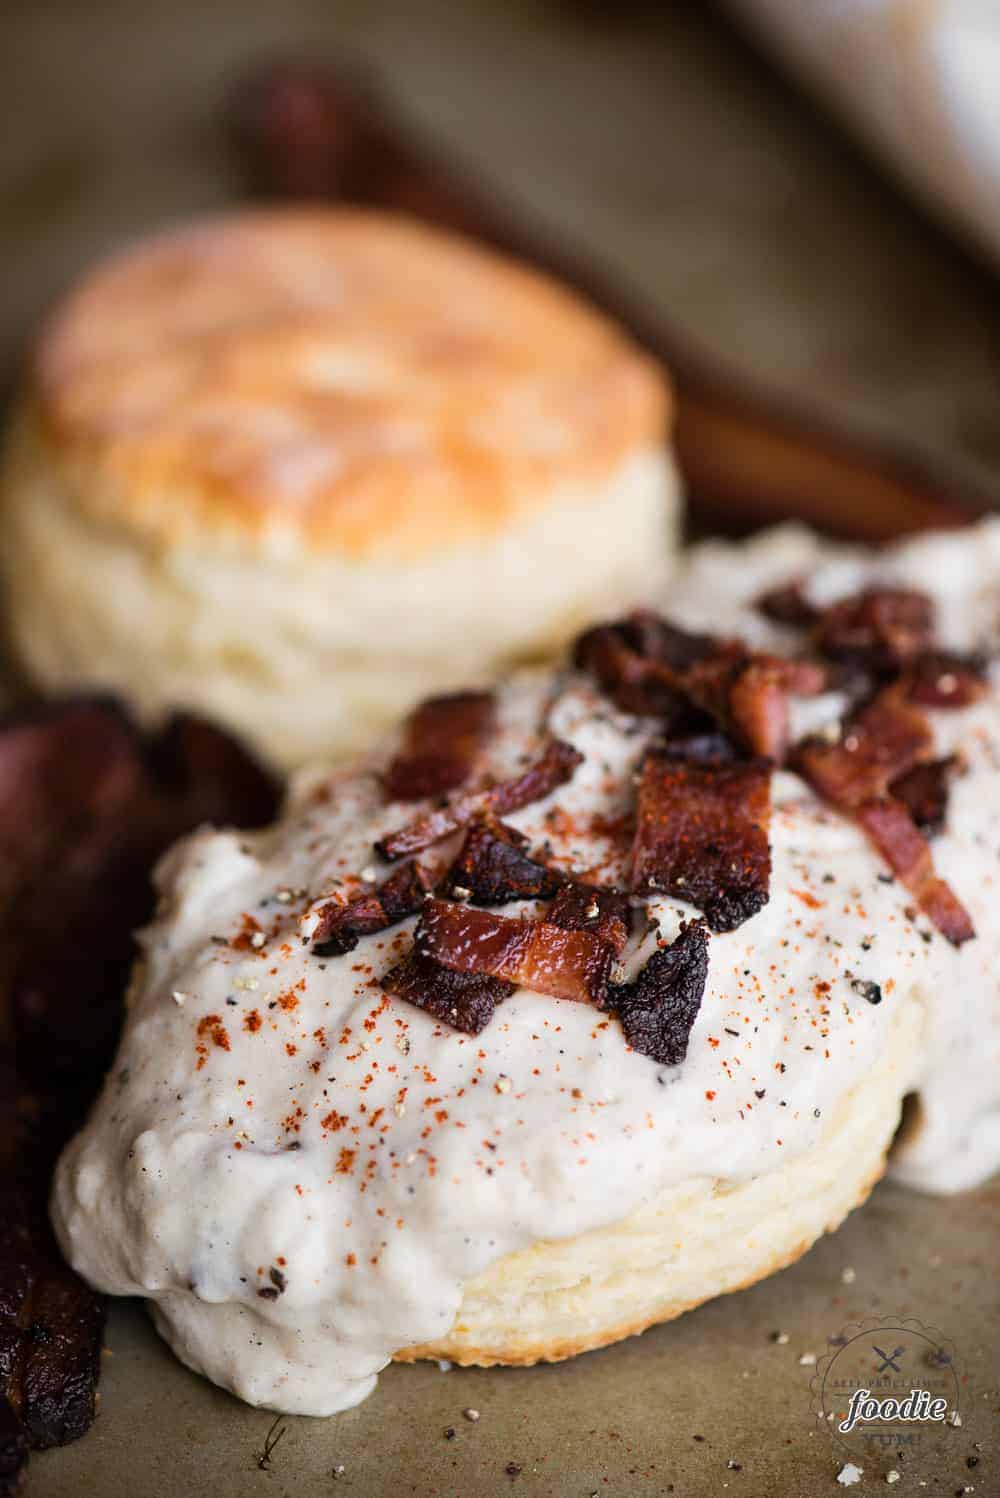 Homemade biscuits and bacon gravy